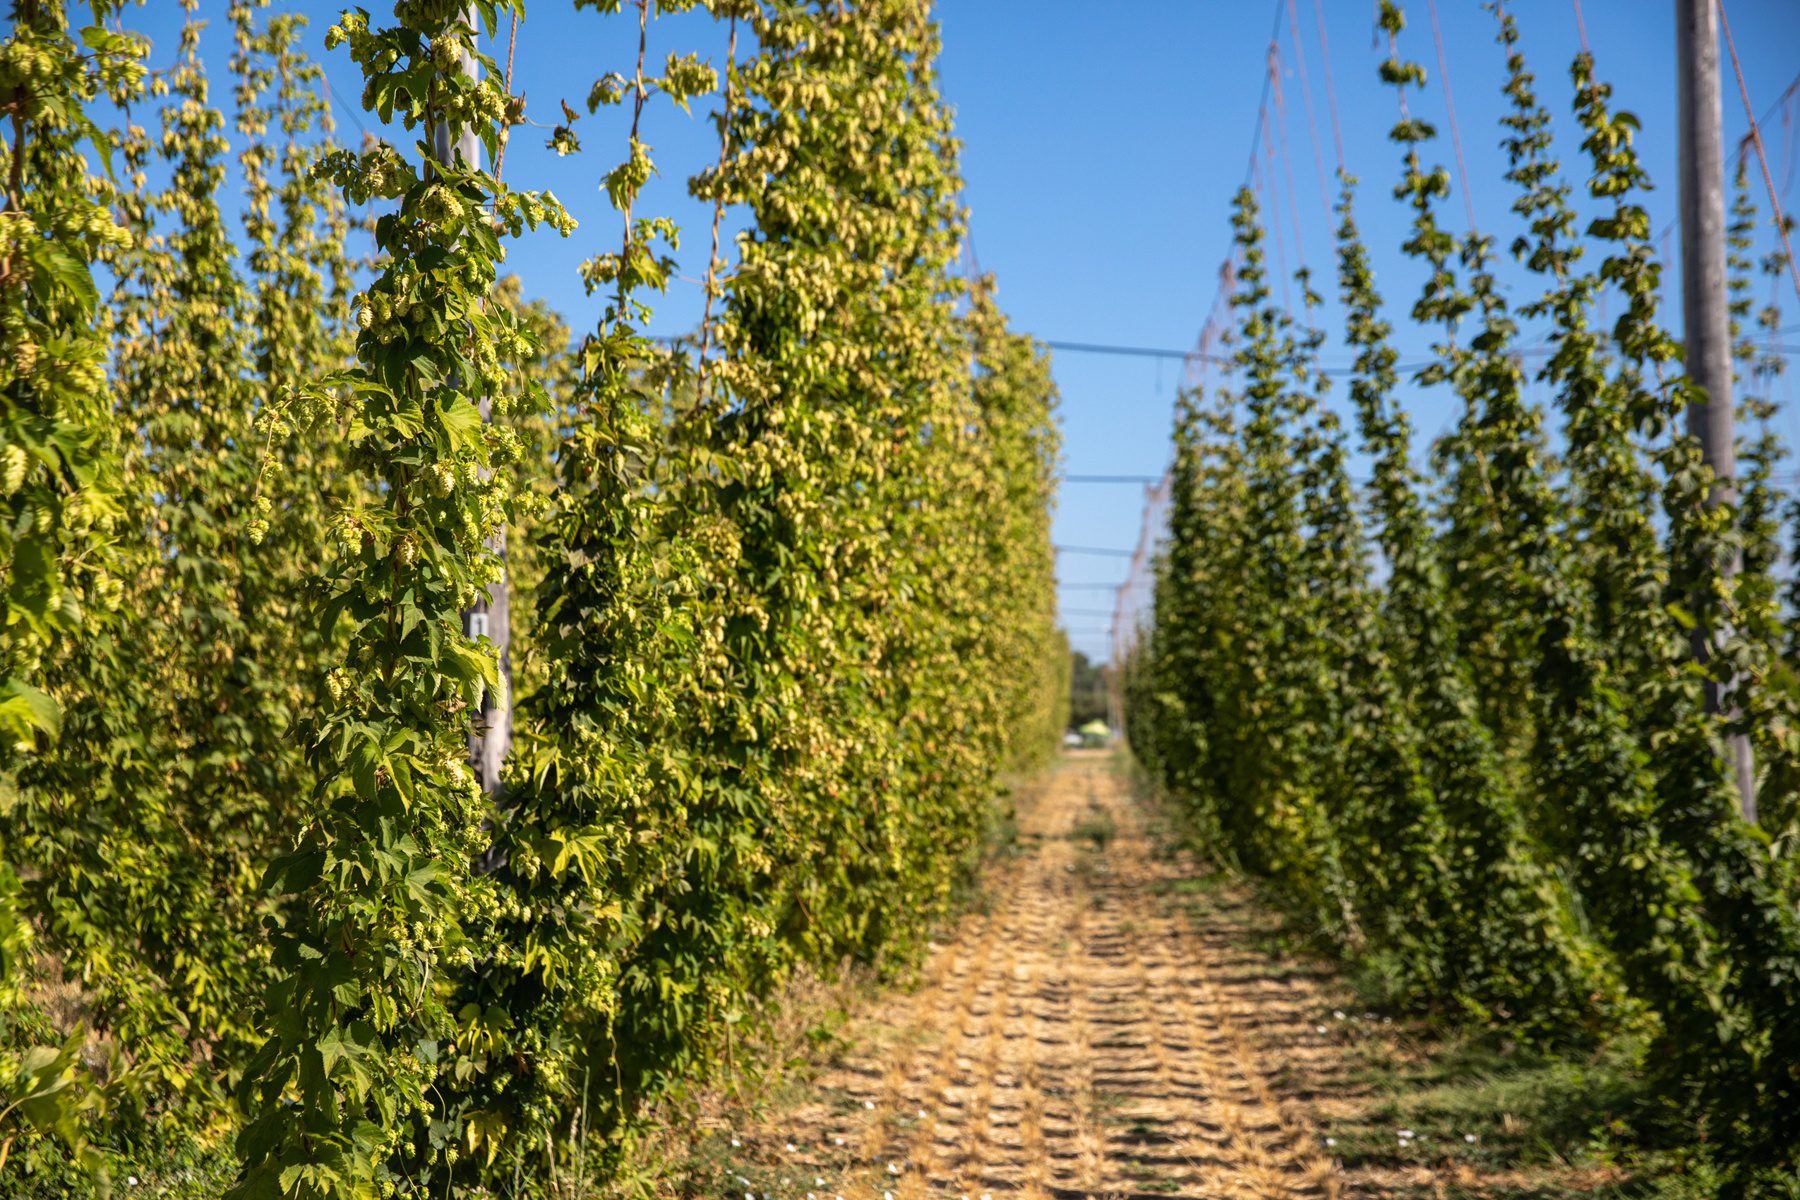 Looking down a row of Estate hops at Sierra Nevada Brewing Co.